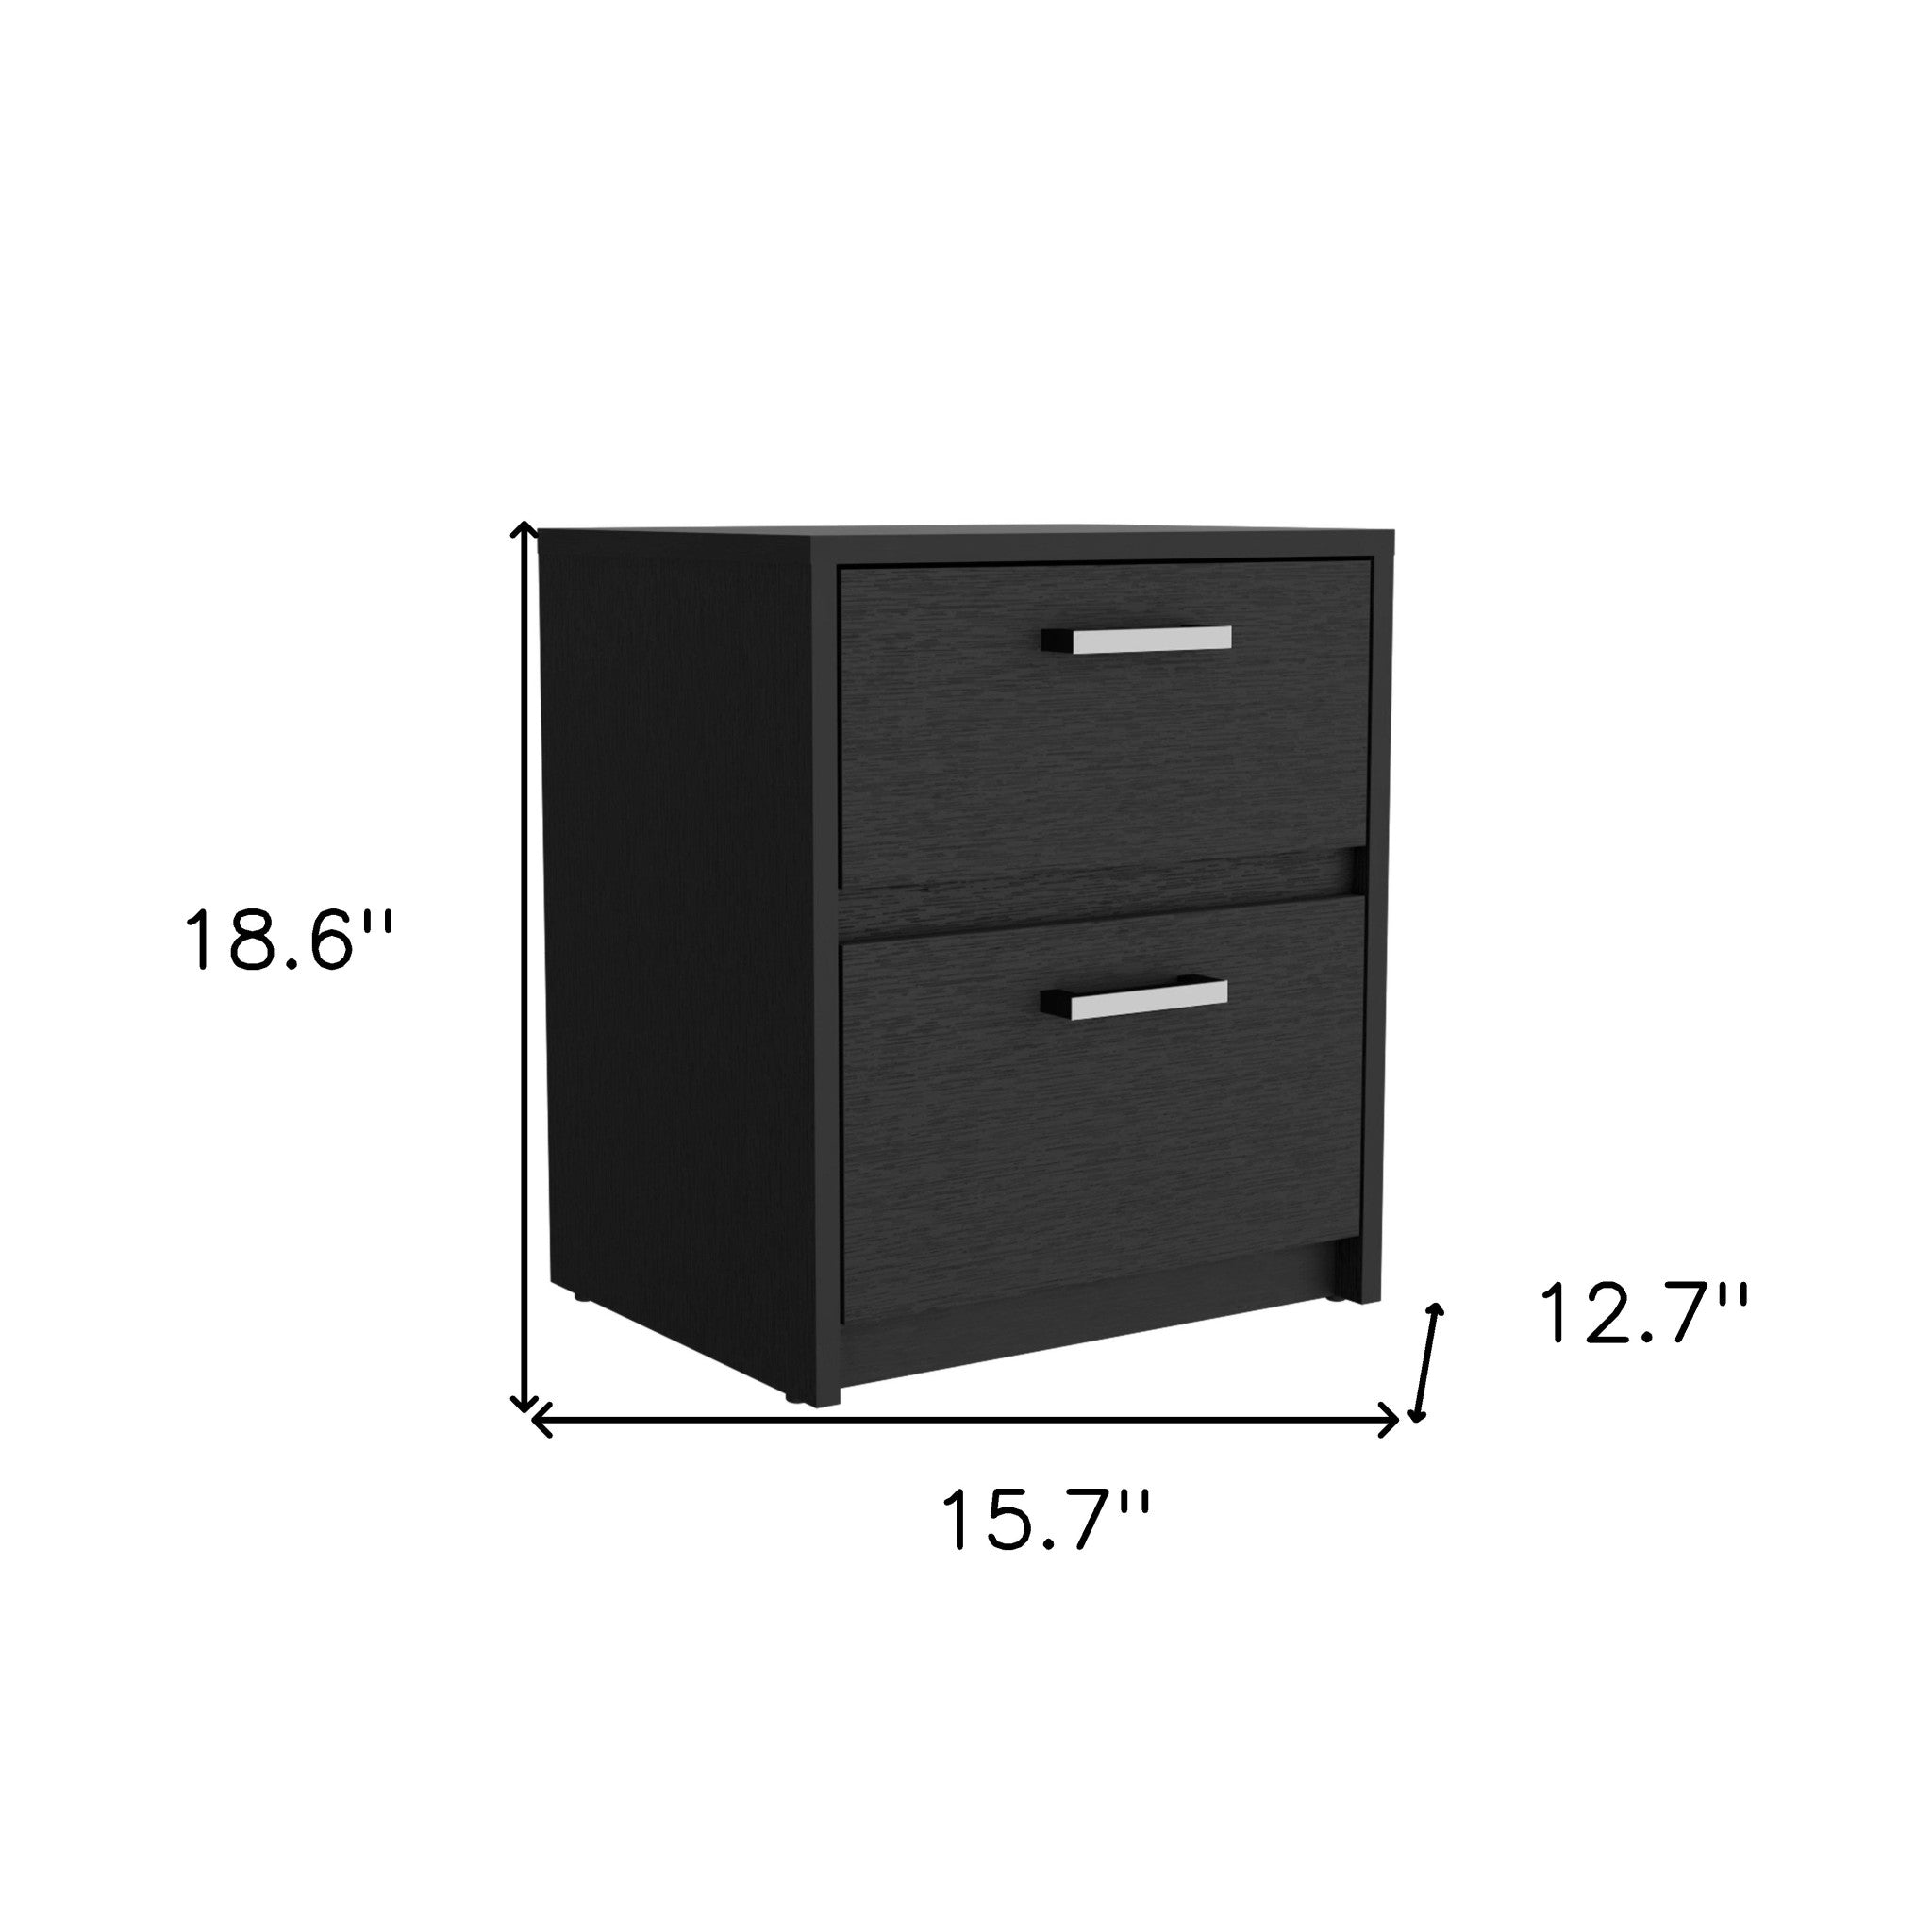 19" Black Two Drawer Faux Wood Nightstand